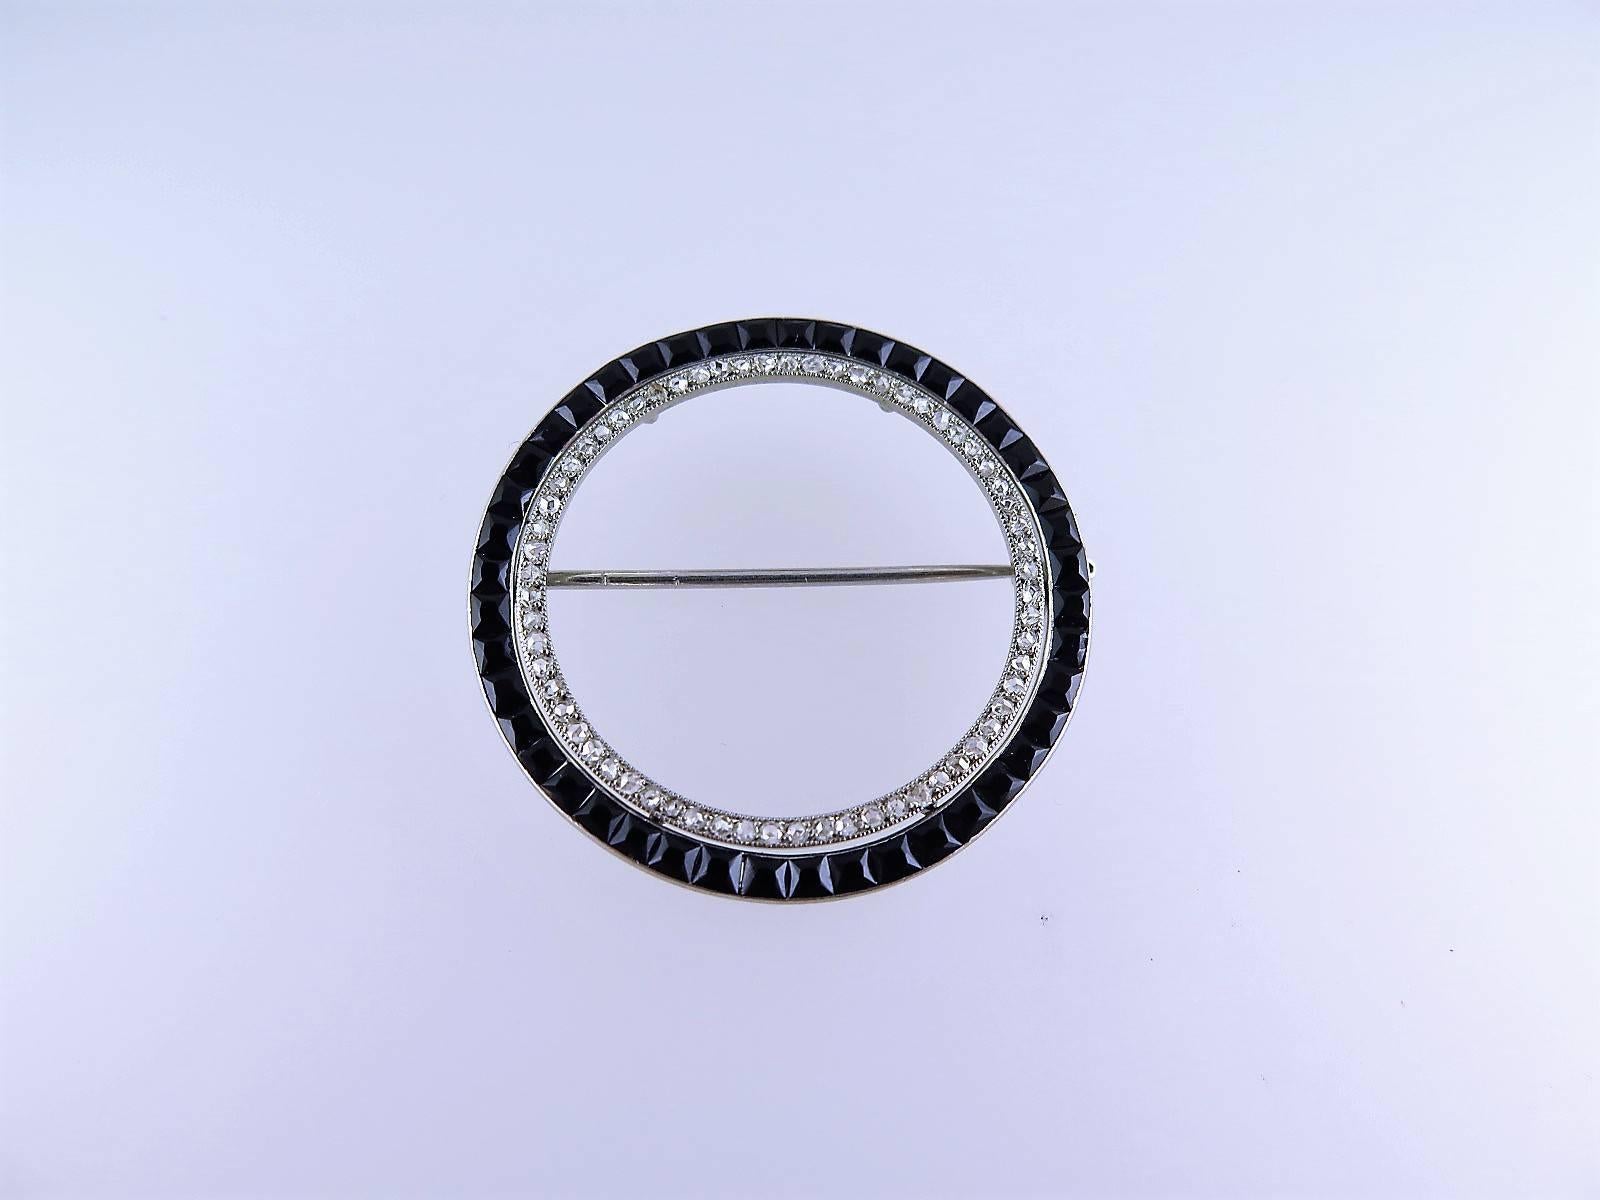 Of open circle design, set with two concentric circles of French-cut onyx and rose-cut diamonds, mounted in platinum, signed Cartier Paris Deposé, numbered